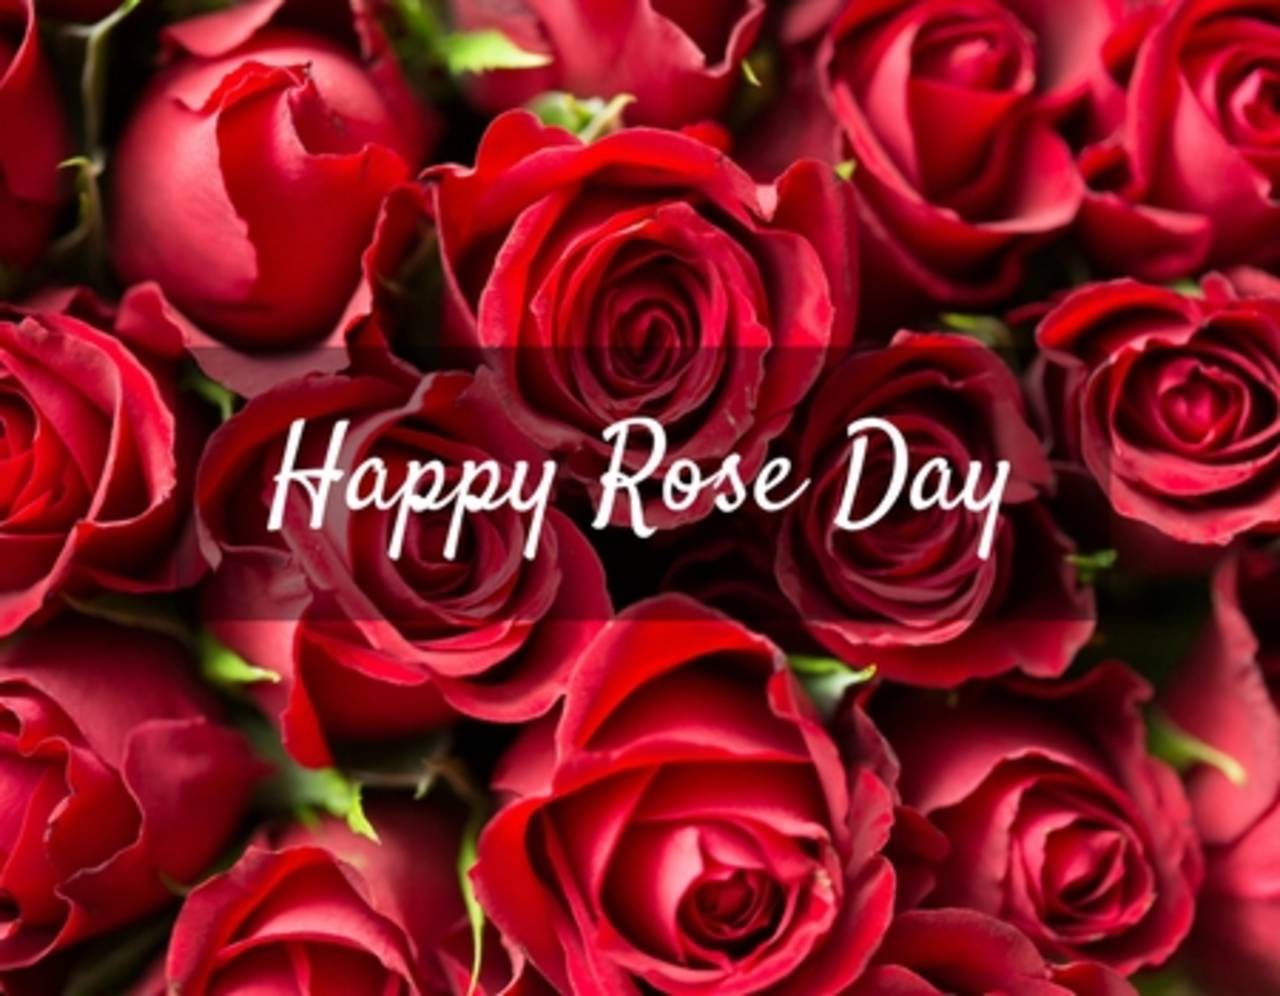 Happy Rose Day 2018 Wishes, Love Quotes, SMSes, Whatsapp Status, GIFs and Images 